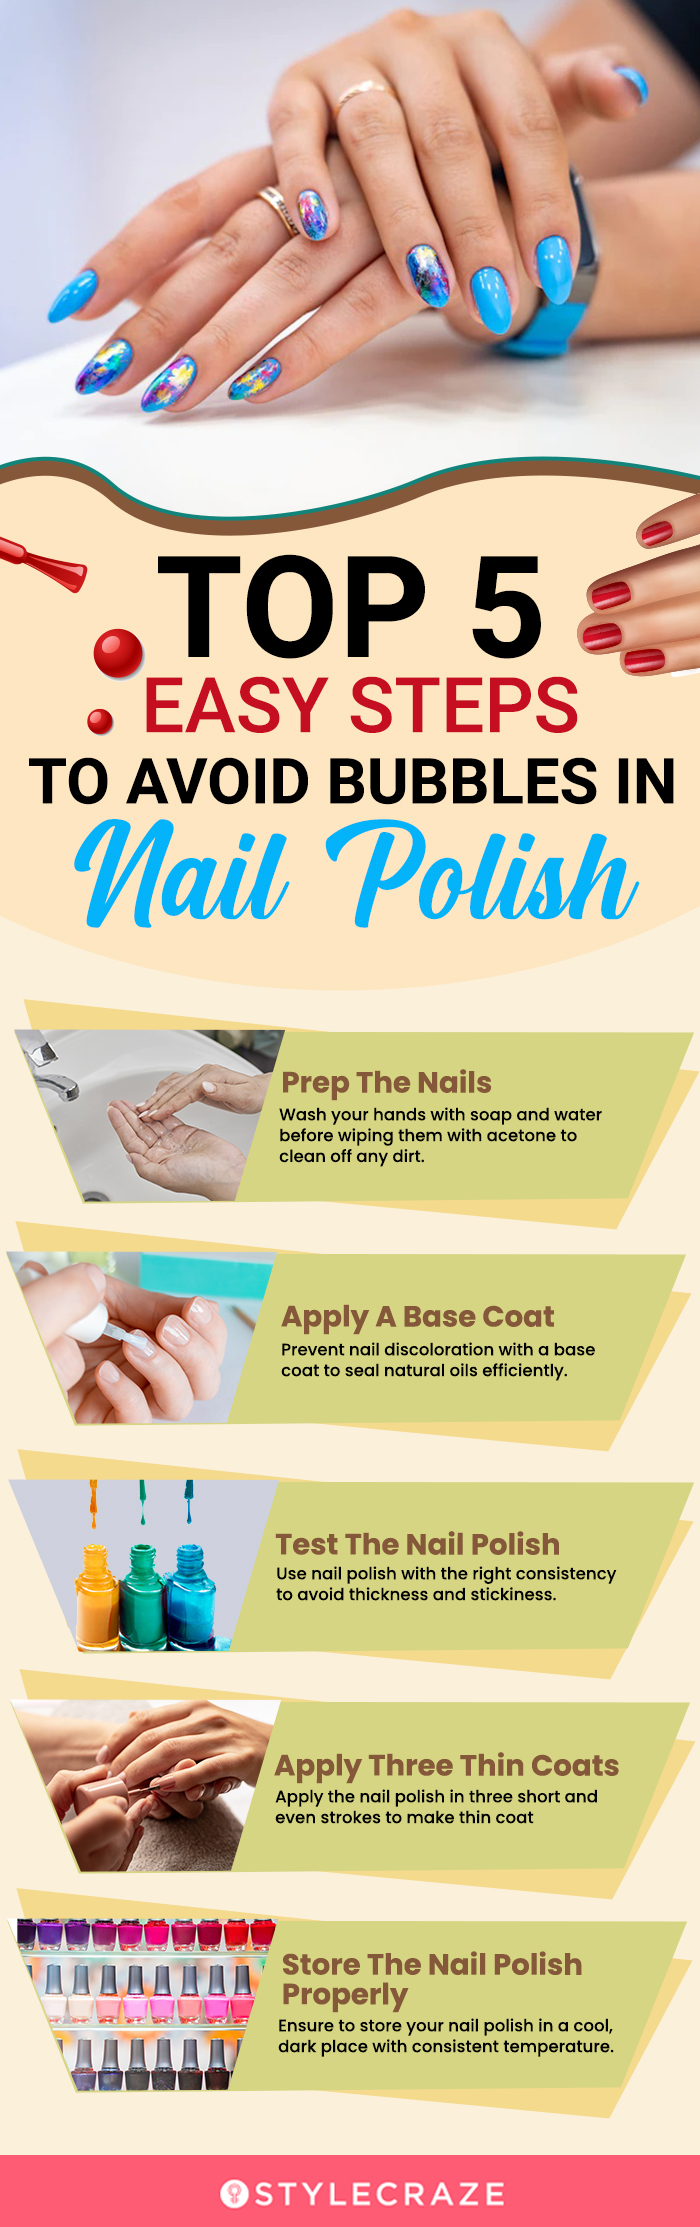 top 5 easy steps to avoid bubbles in nail polish (infographic)